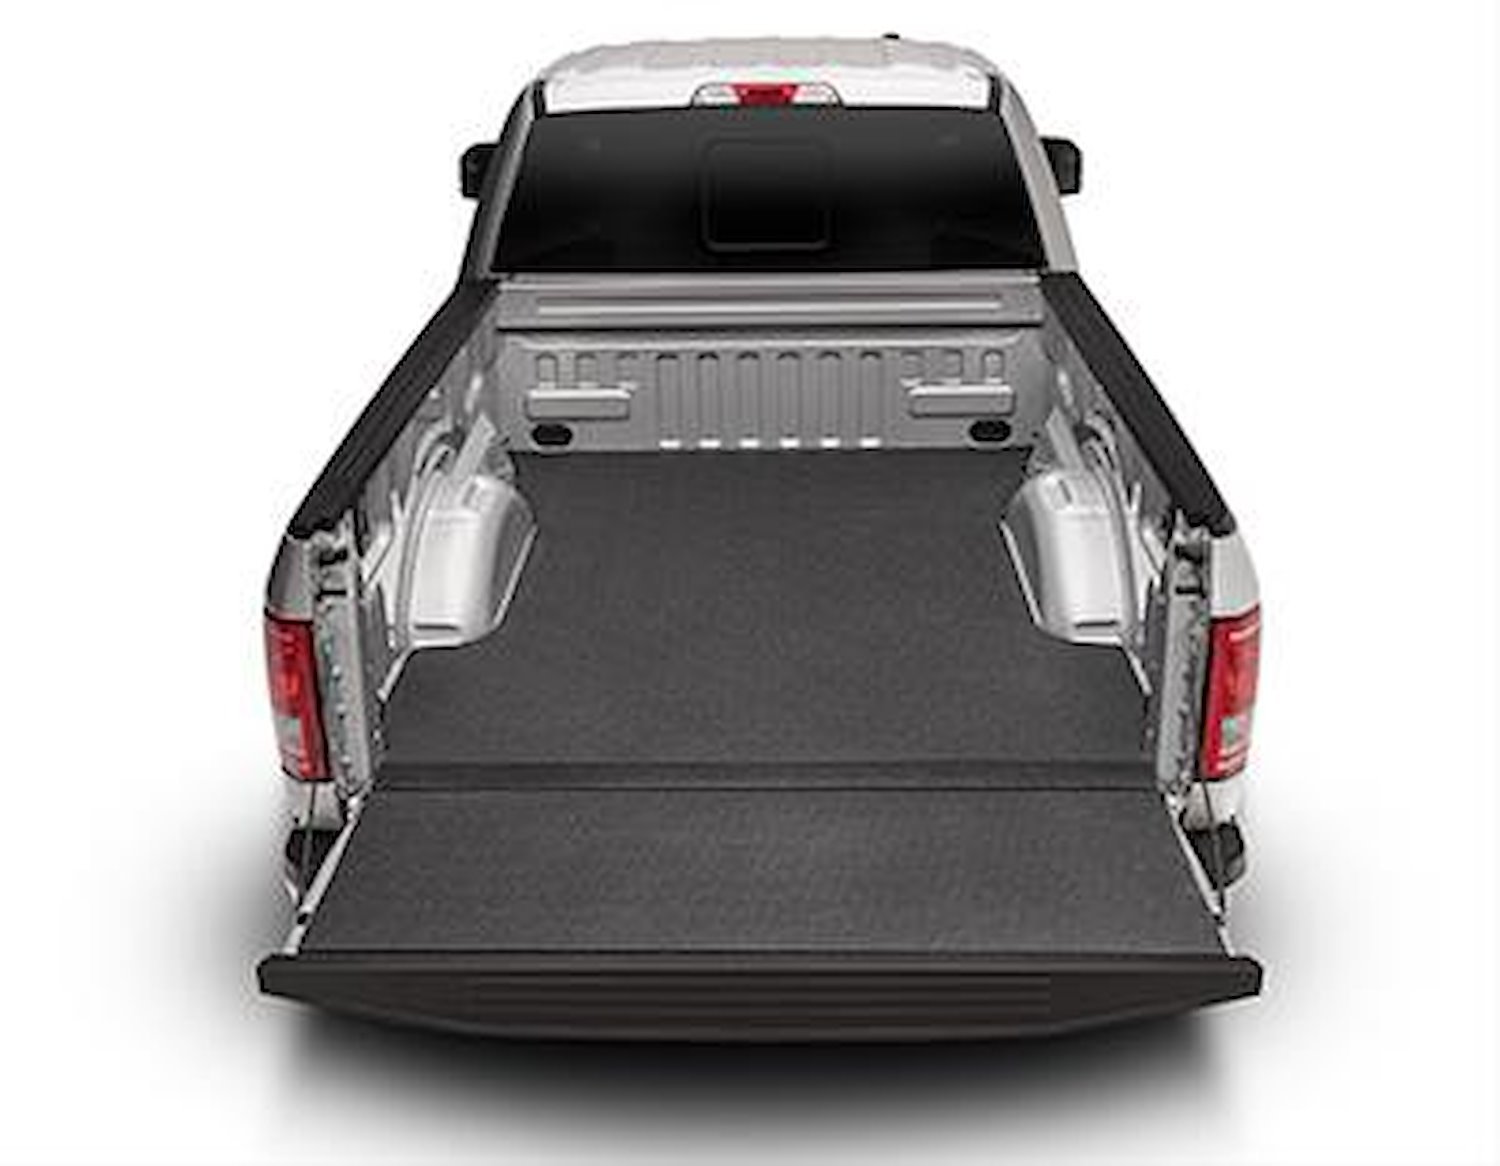 IMY05DCS IMPACT BEDMAT FOR SPRAY-IN OR NO BED LINER 05+ TOYOTA TACOMA 5' BED